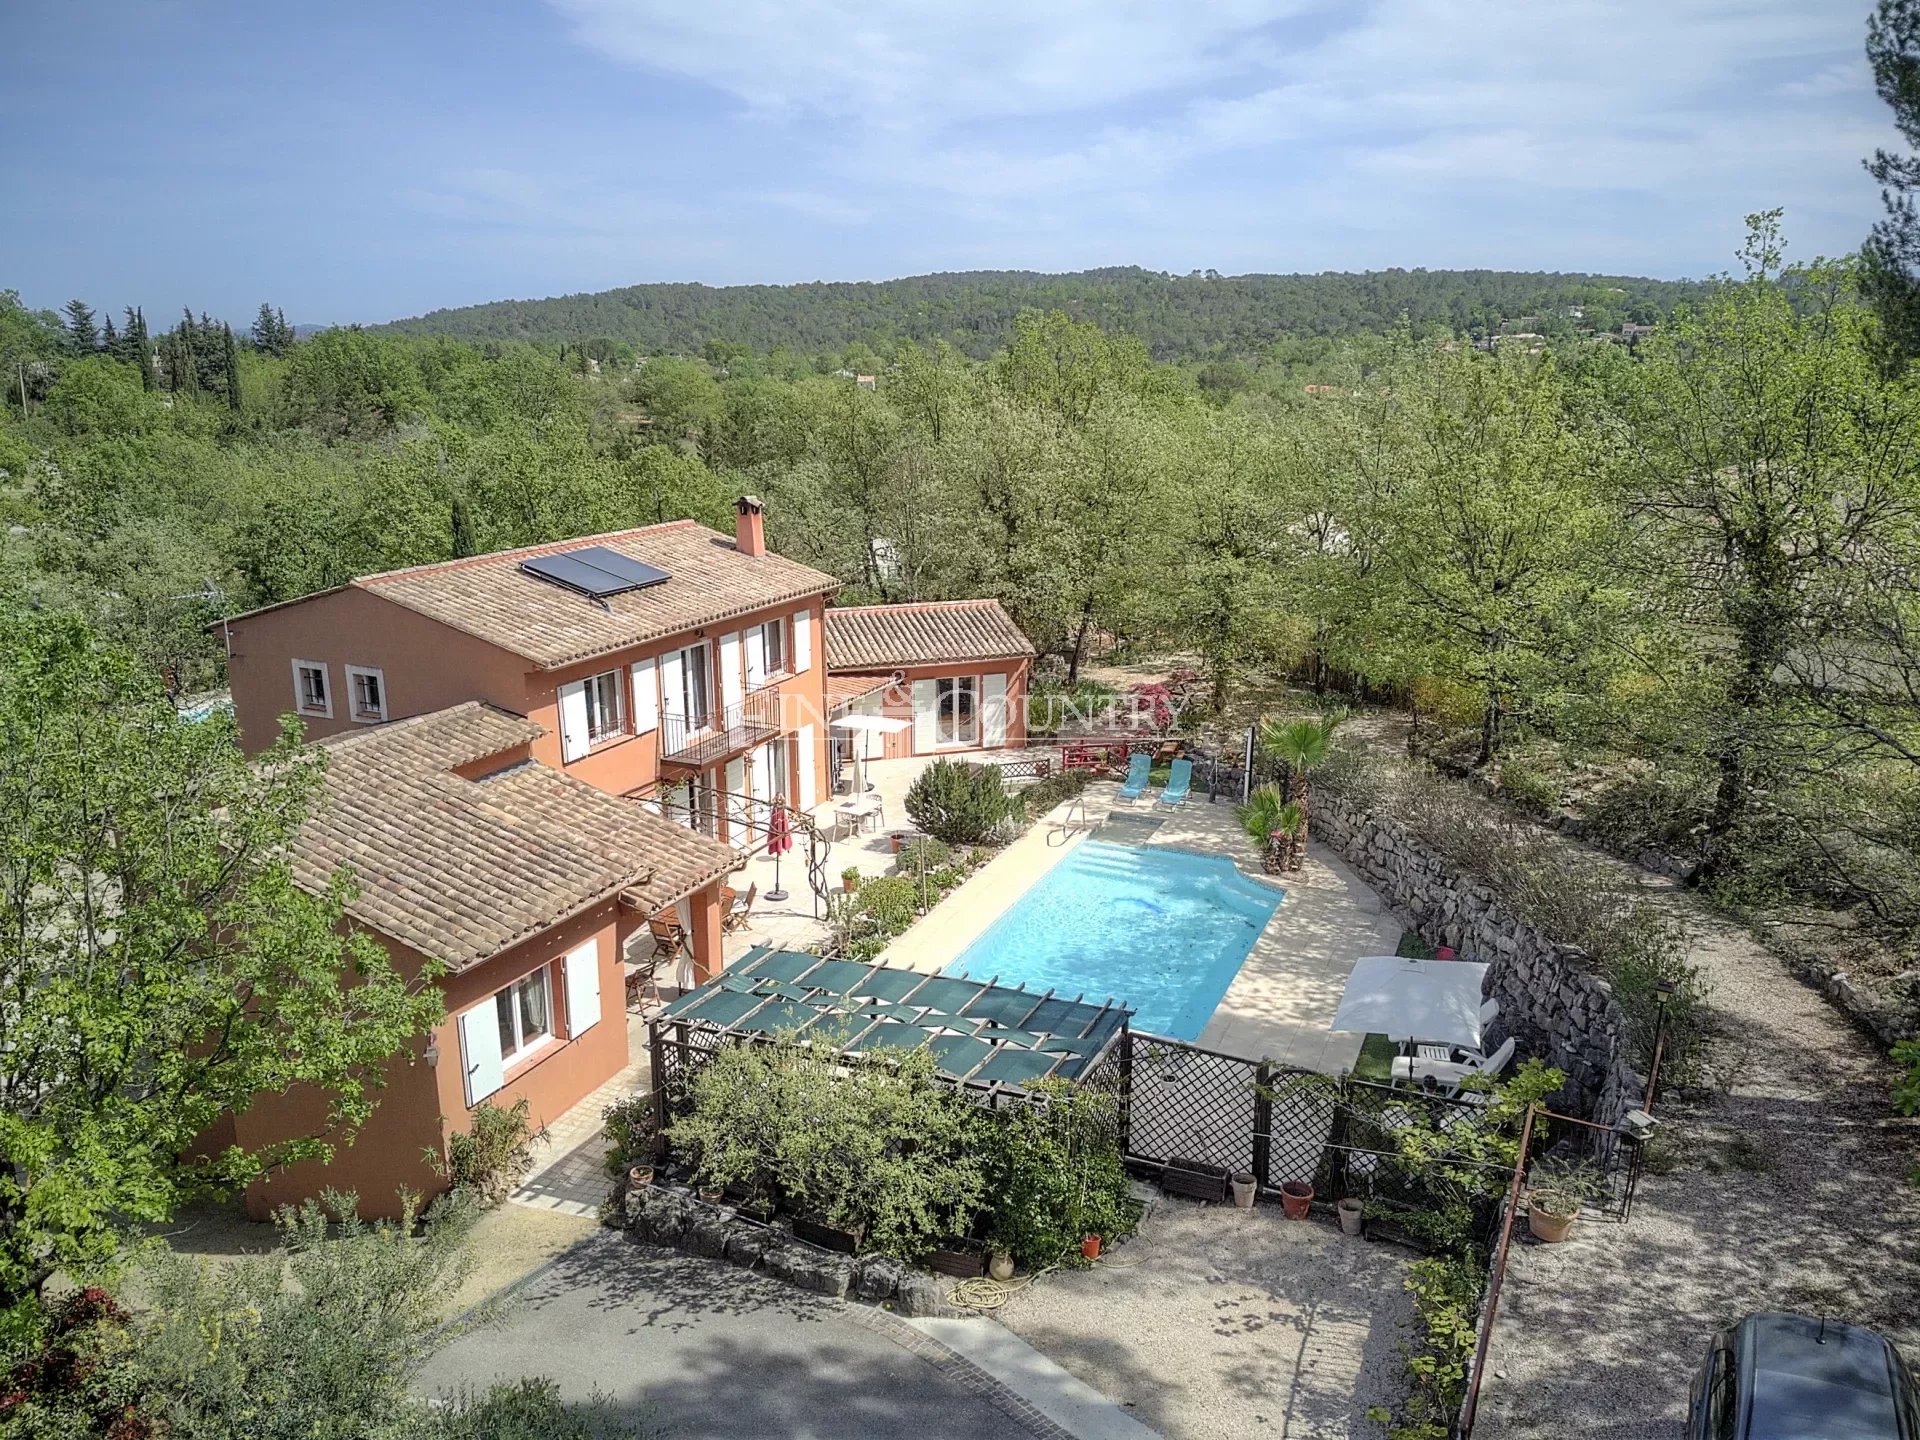 Villa for sale in Fayence with swimming pool.